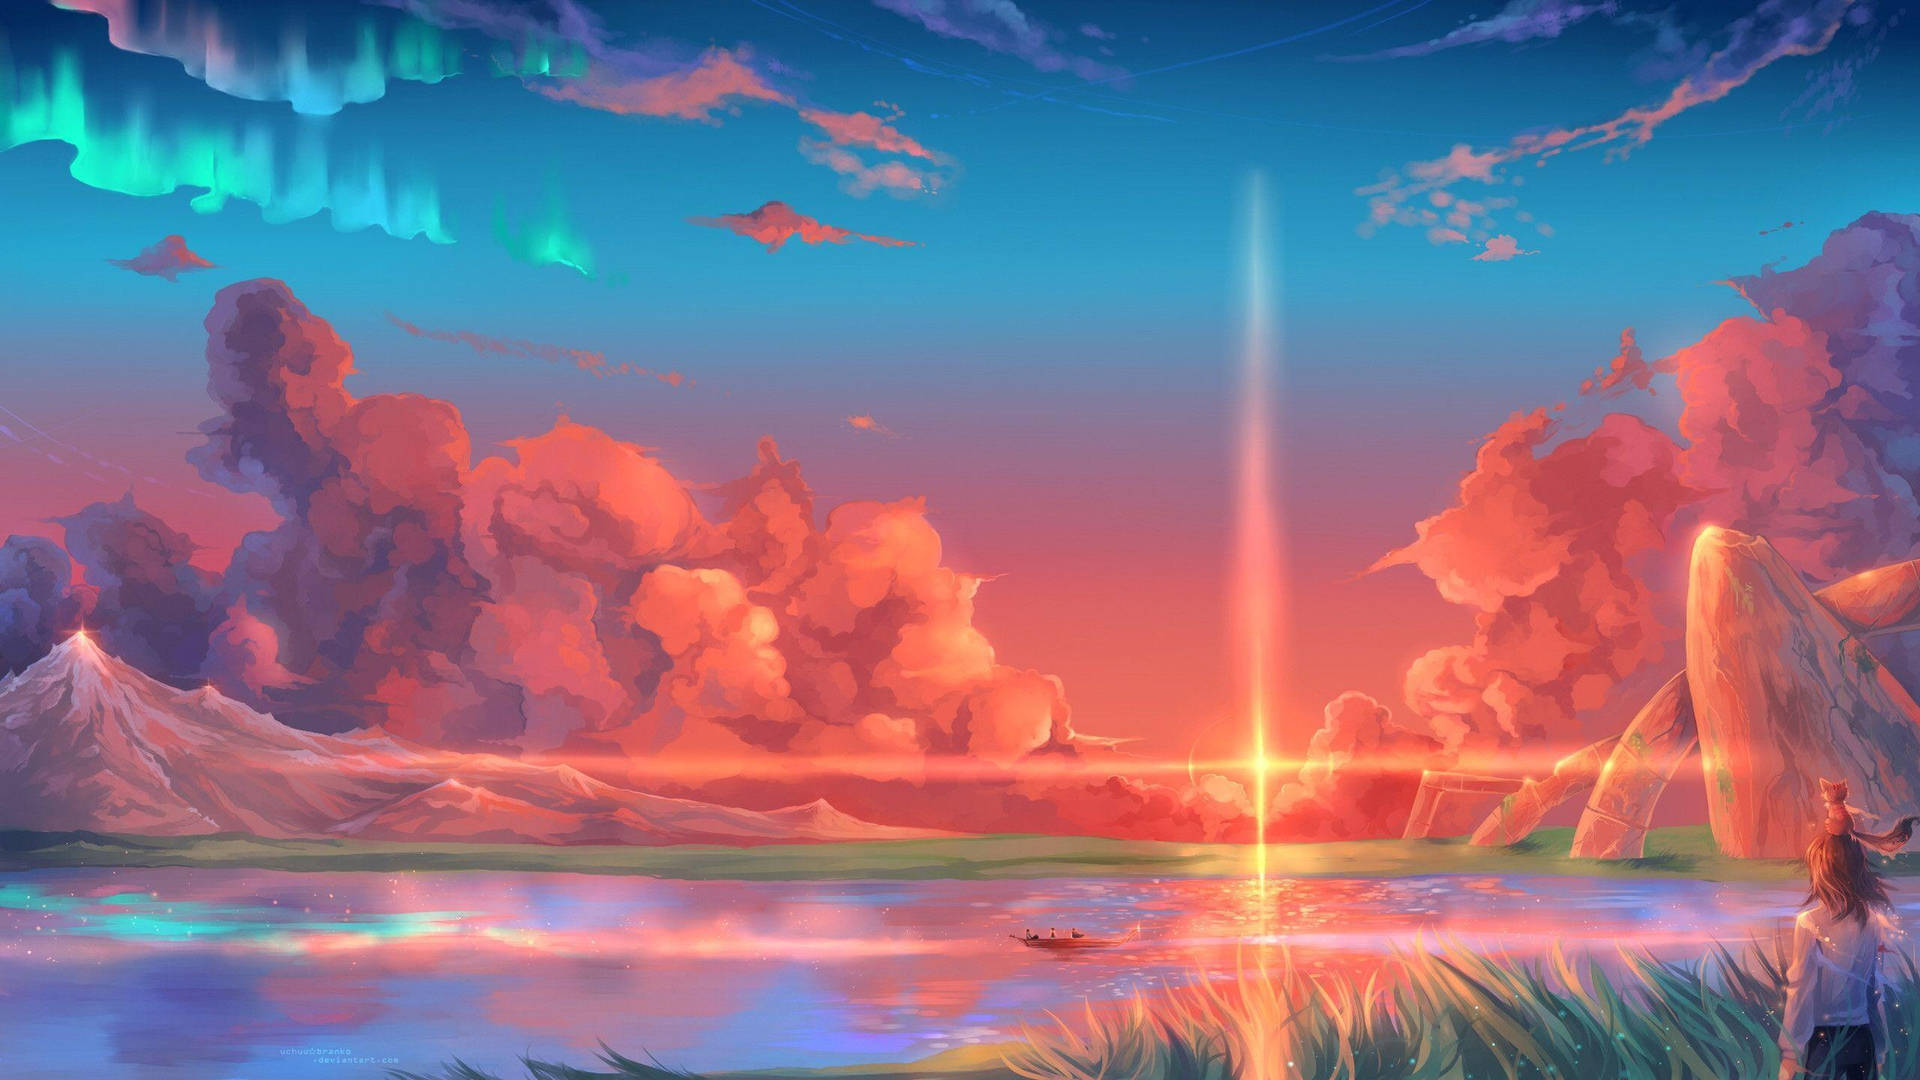 Anime Aesthetic 2560X1440 Wallpaper and Background Image